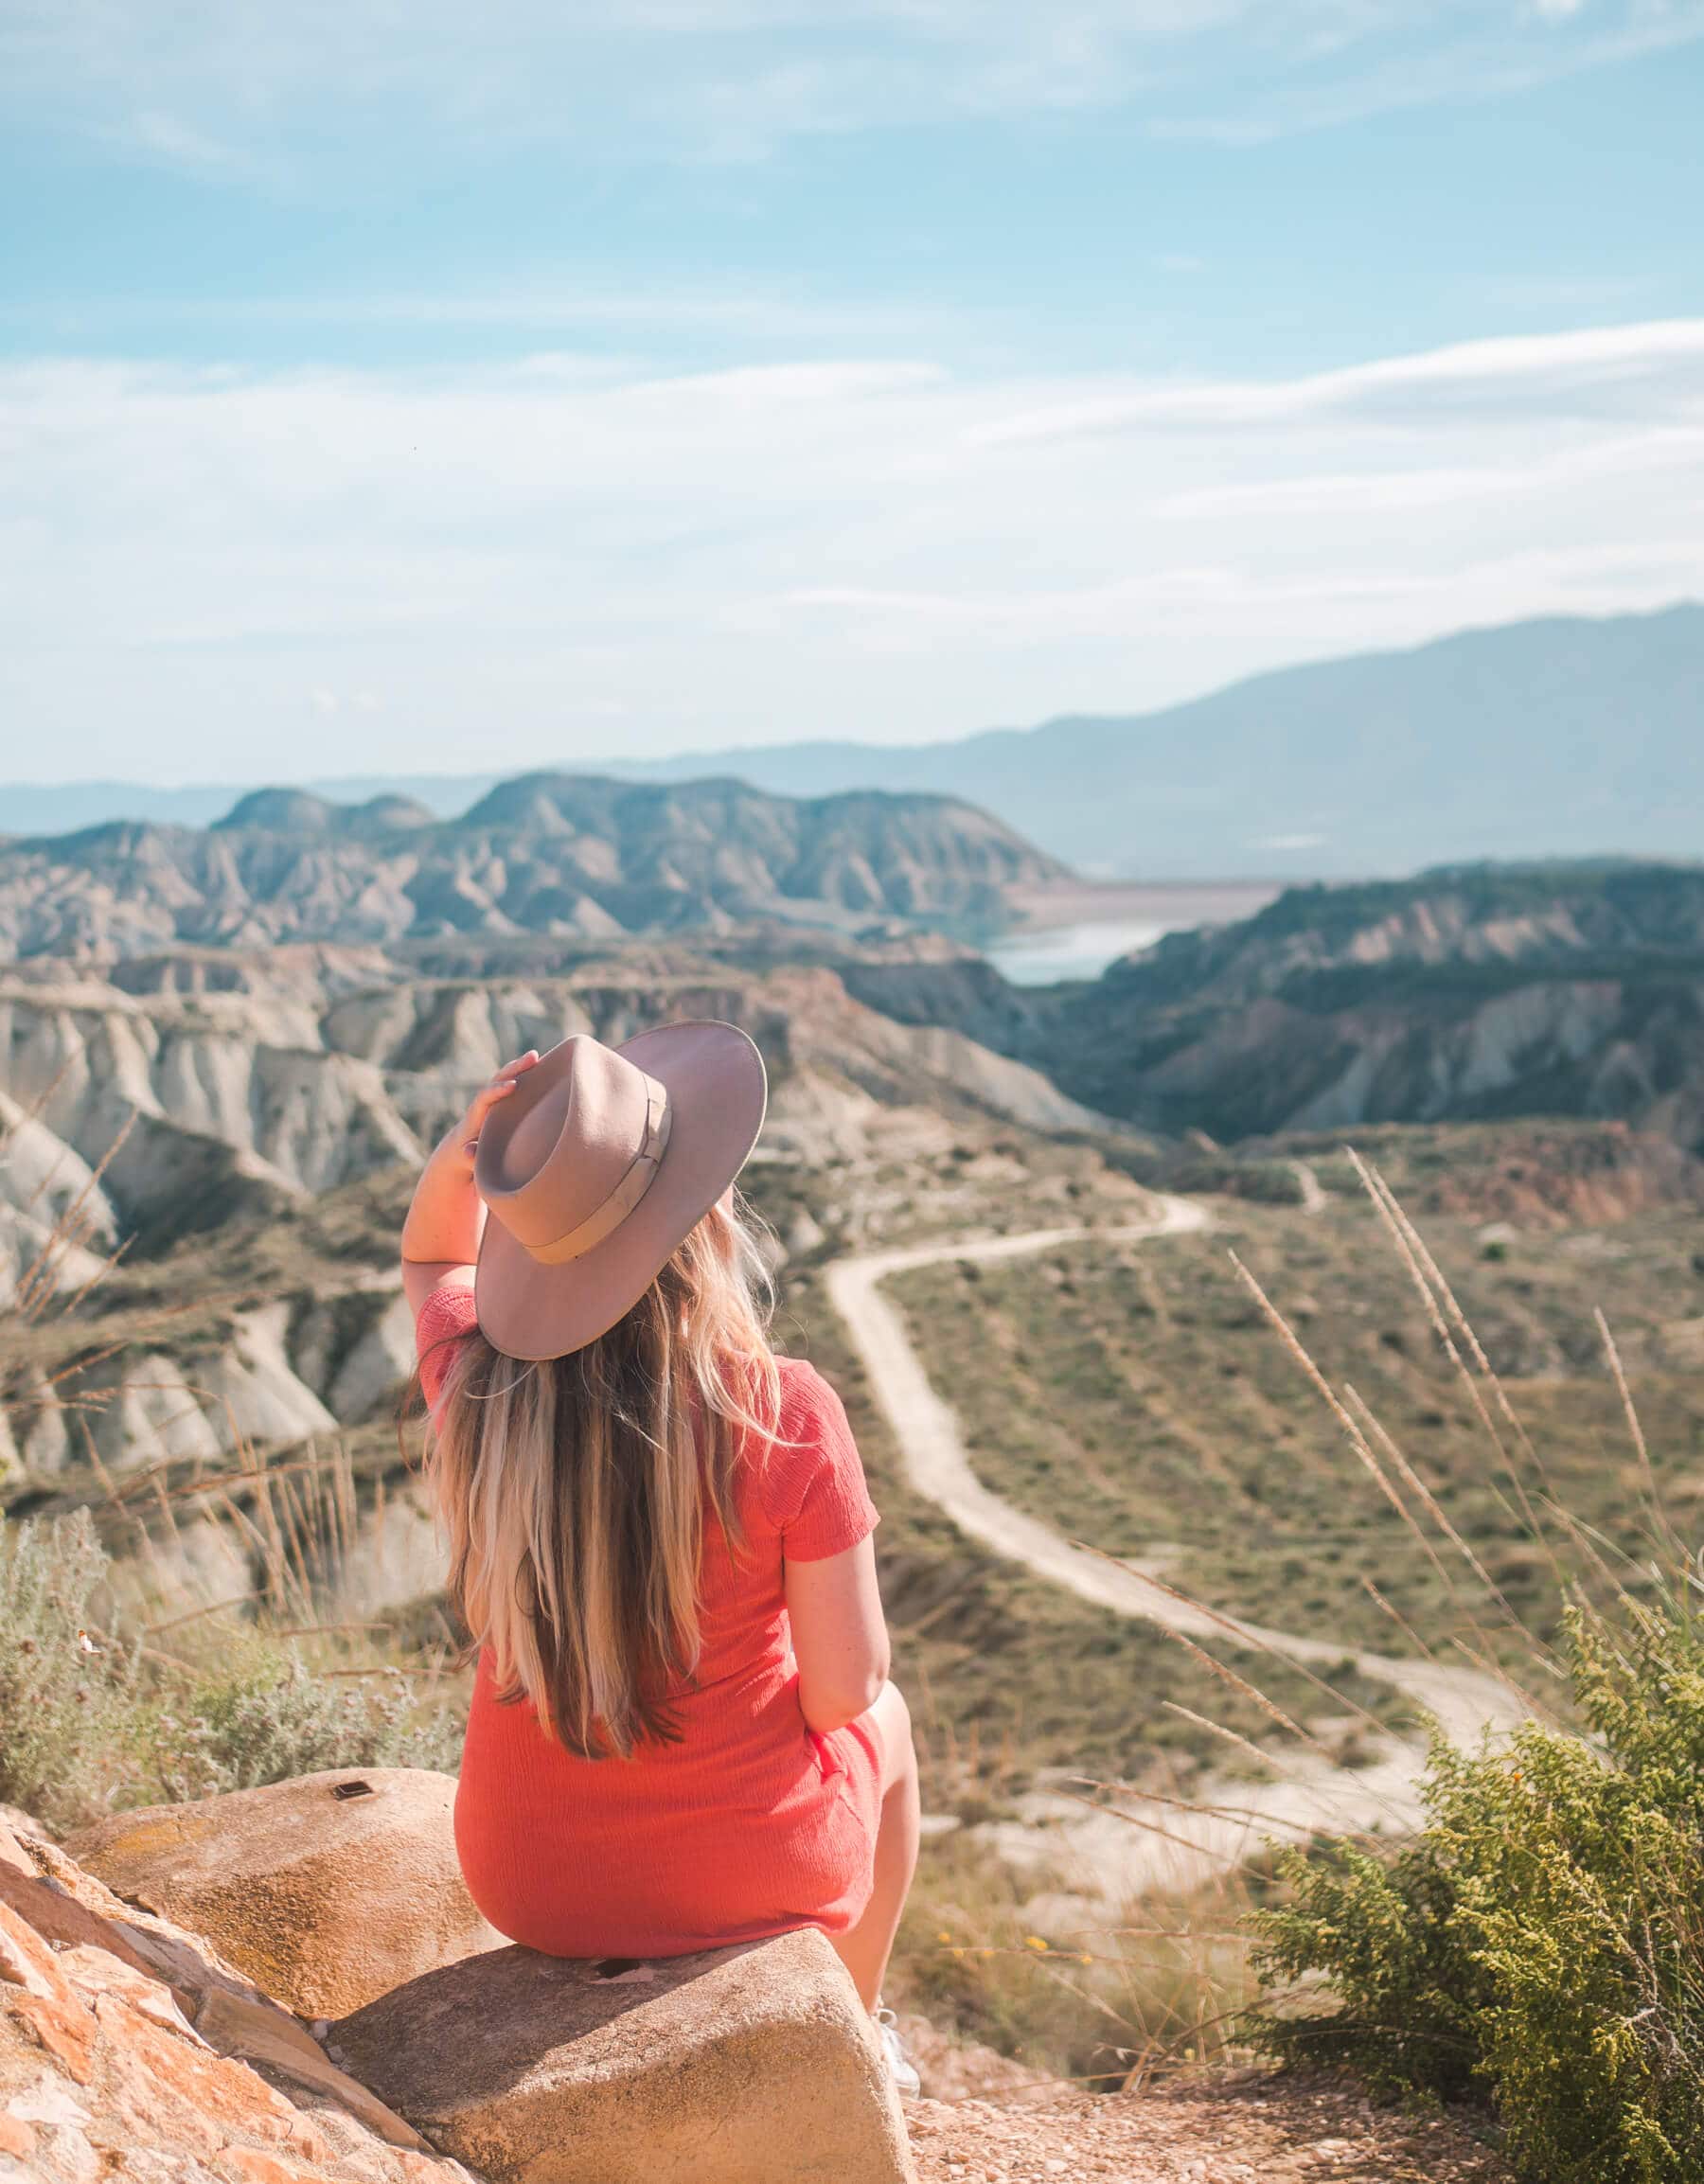 Mirador Barrancos de Gebas (also known as the Lunar Badlands) in Murcia, one of Spain's most beautiful natural wonders. One of the top things to do in Spain